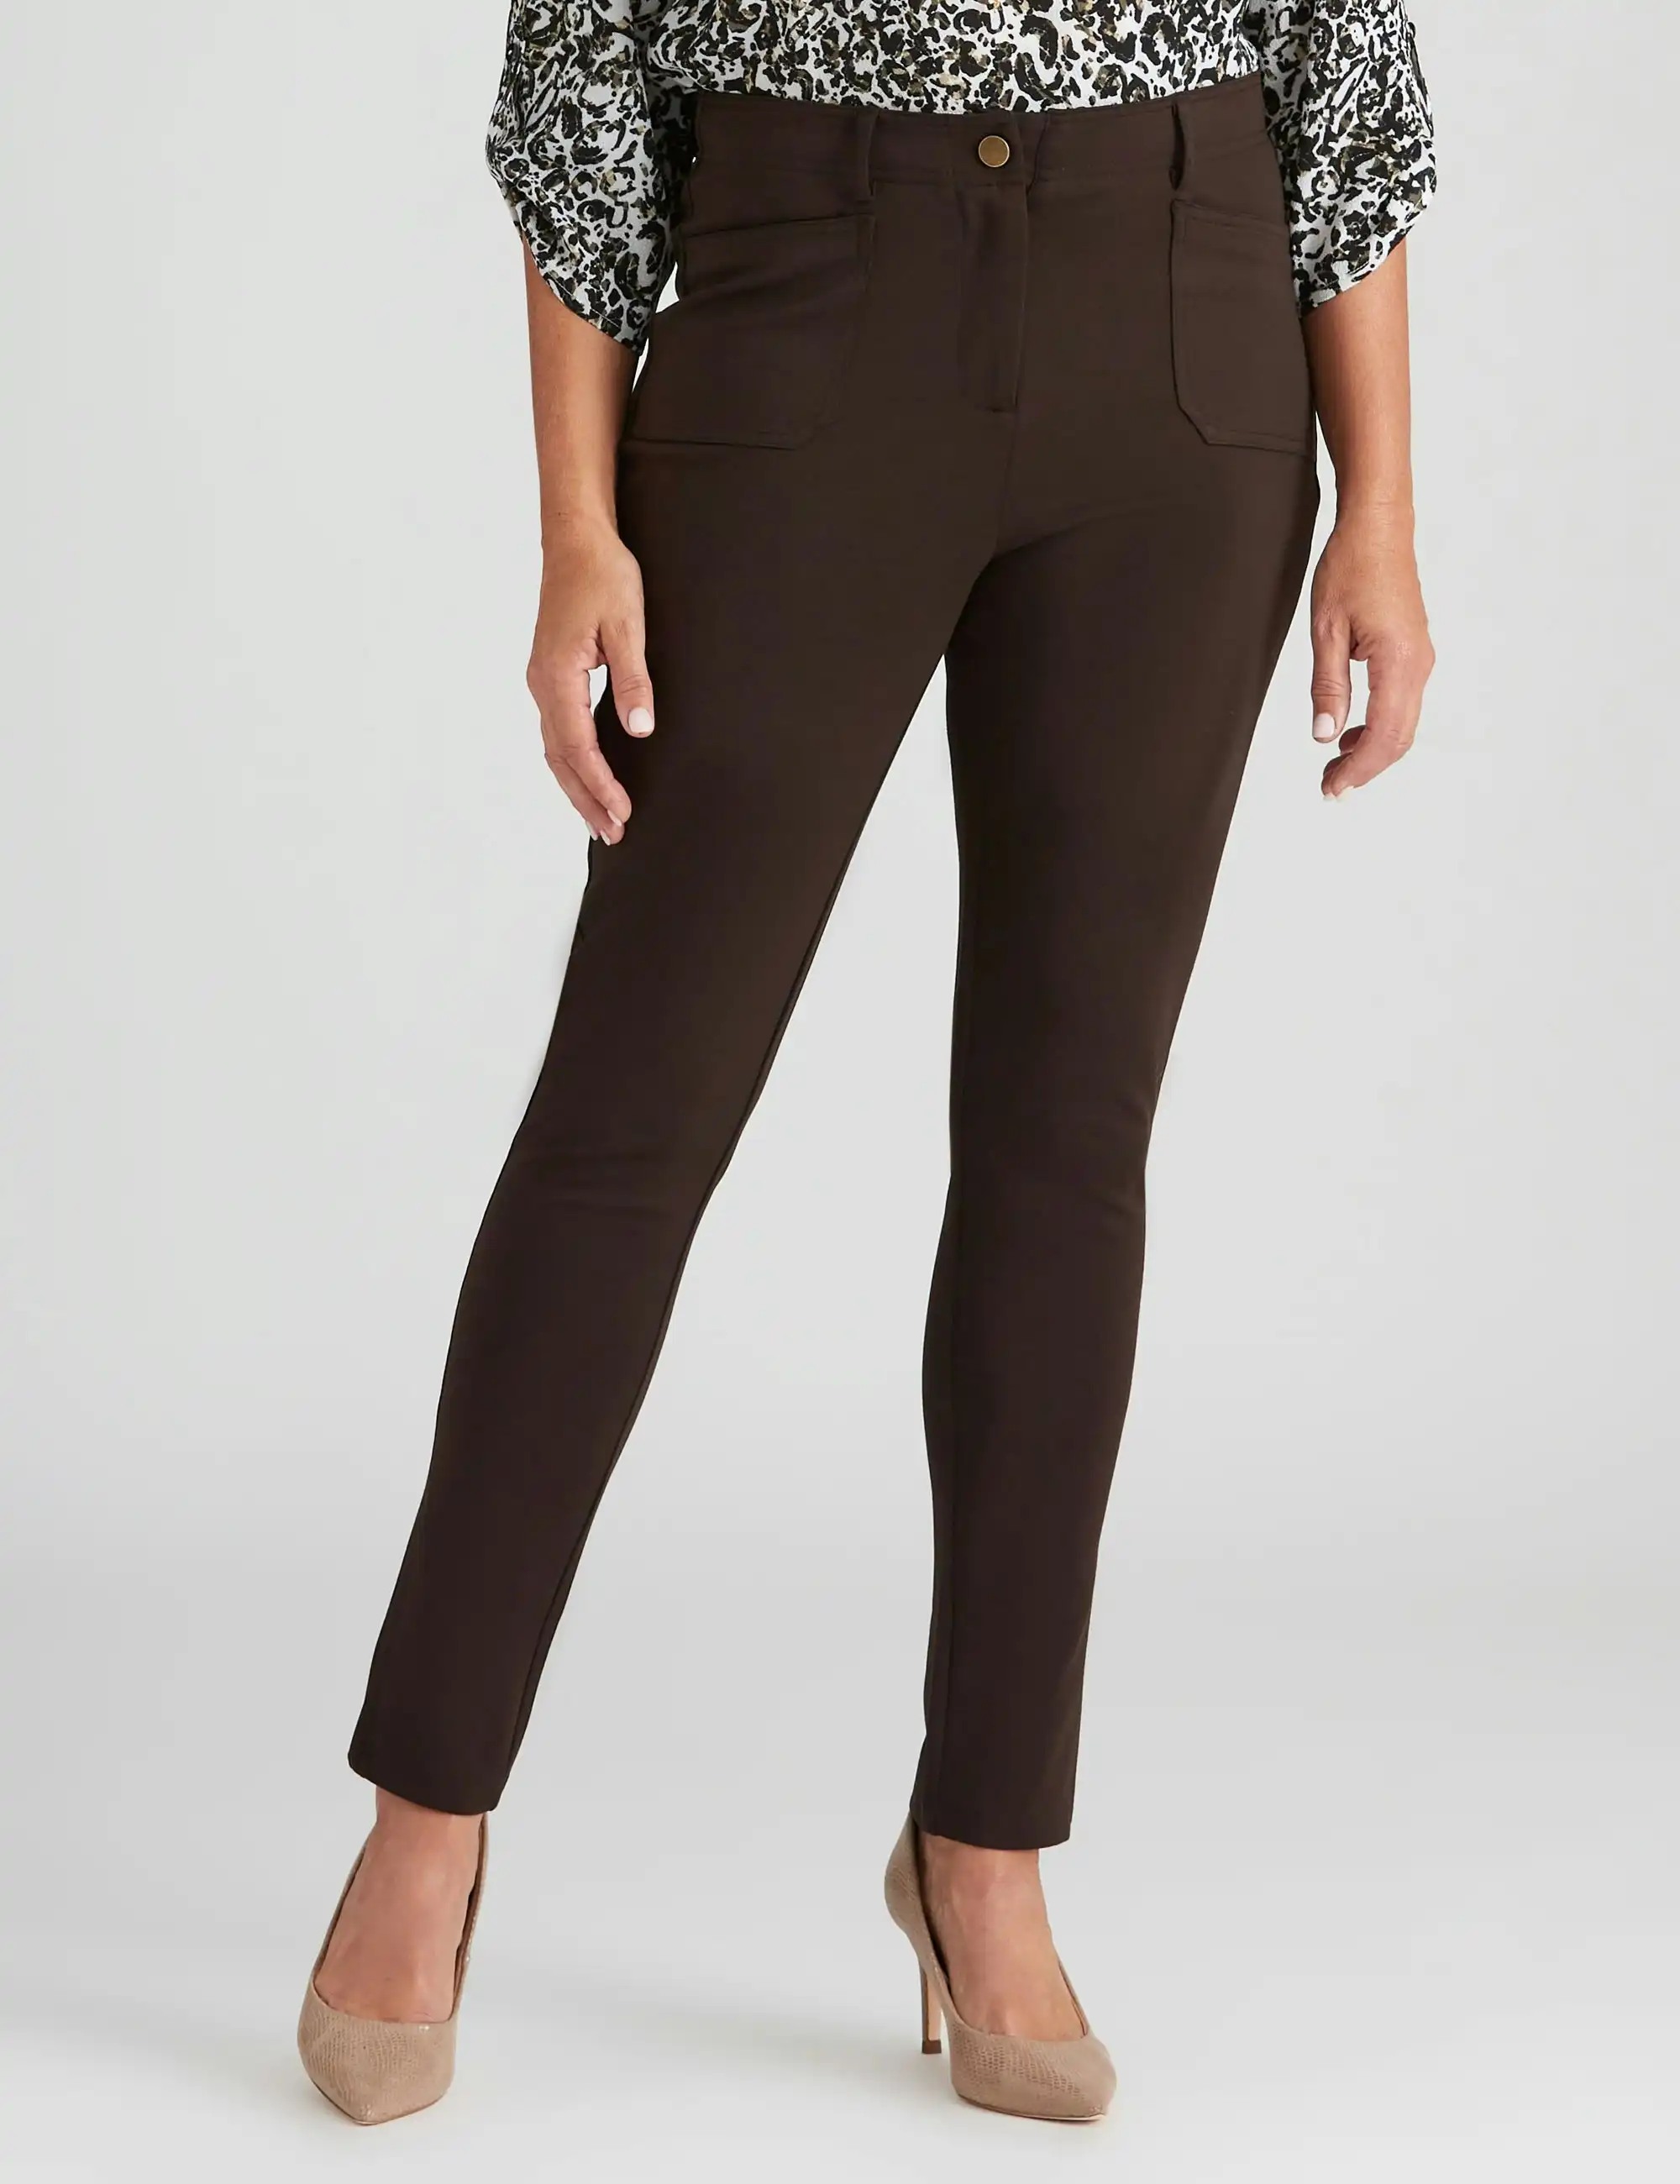 Millers Zipped Front Ponte Pants (Chocolate)